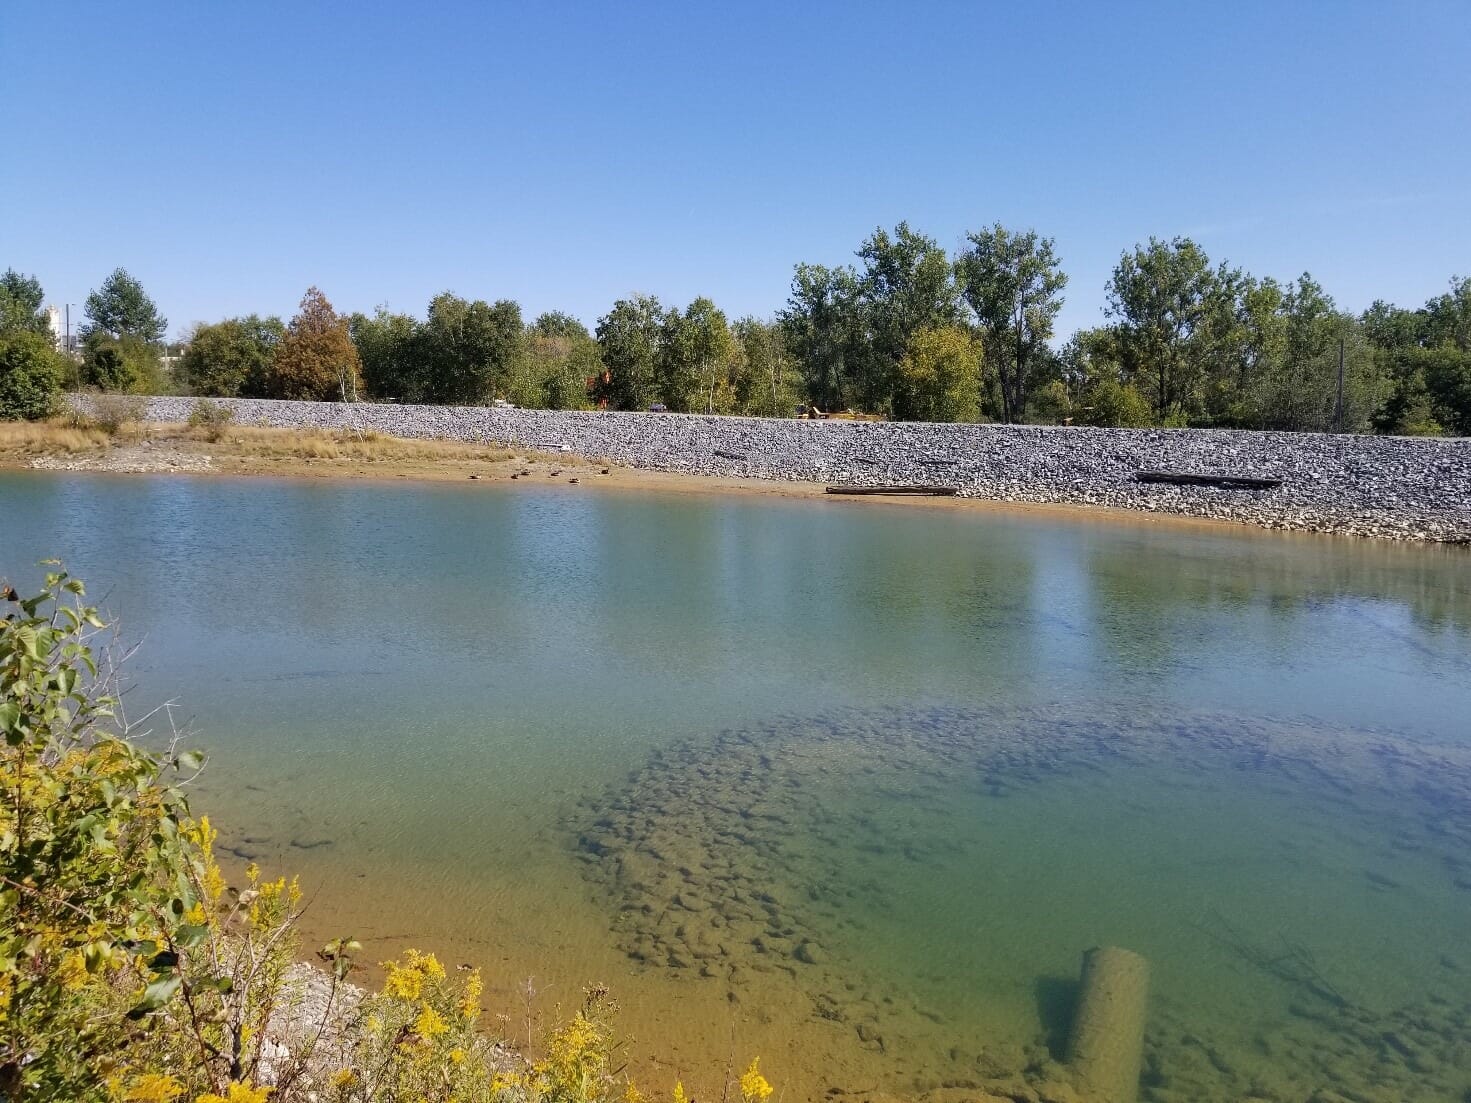 A pond in the middle of a field with rocks around it.